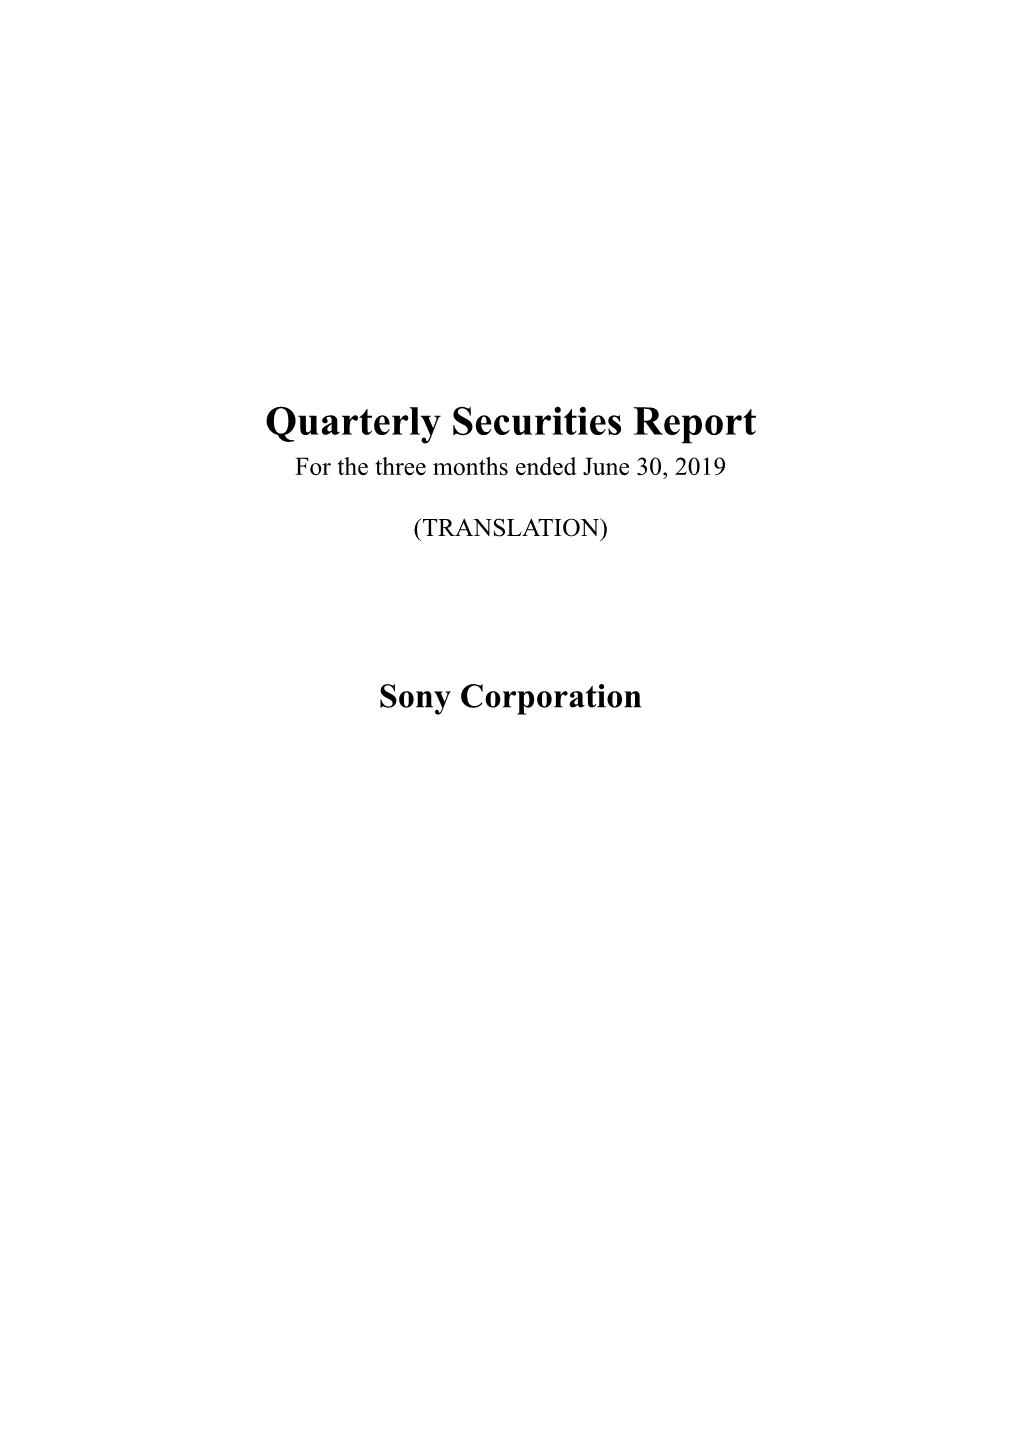 Quarterly Securities Report for the Three Months Ended June 30, 2019